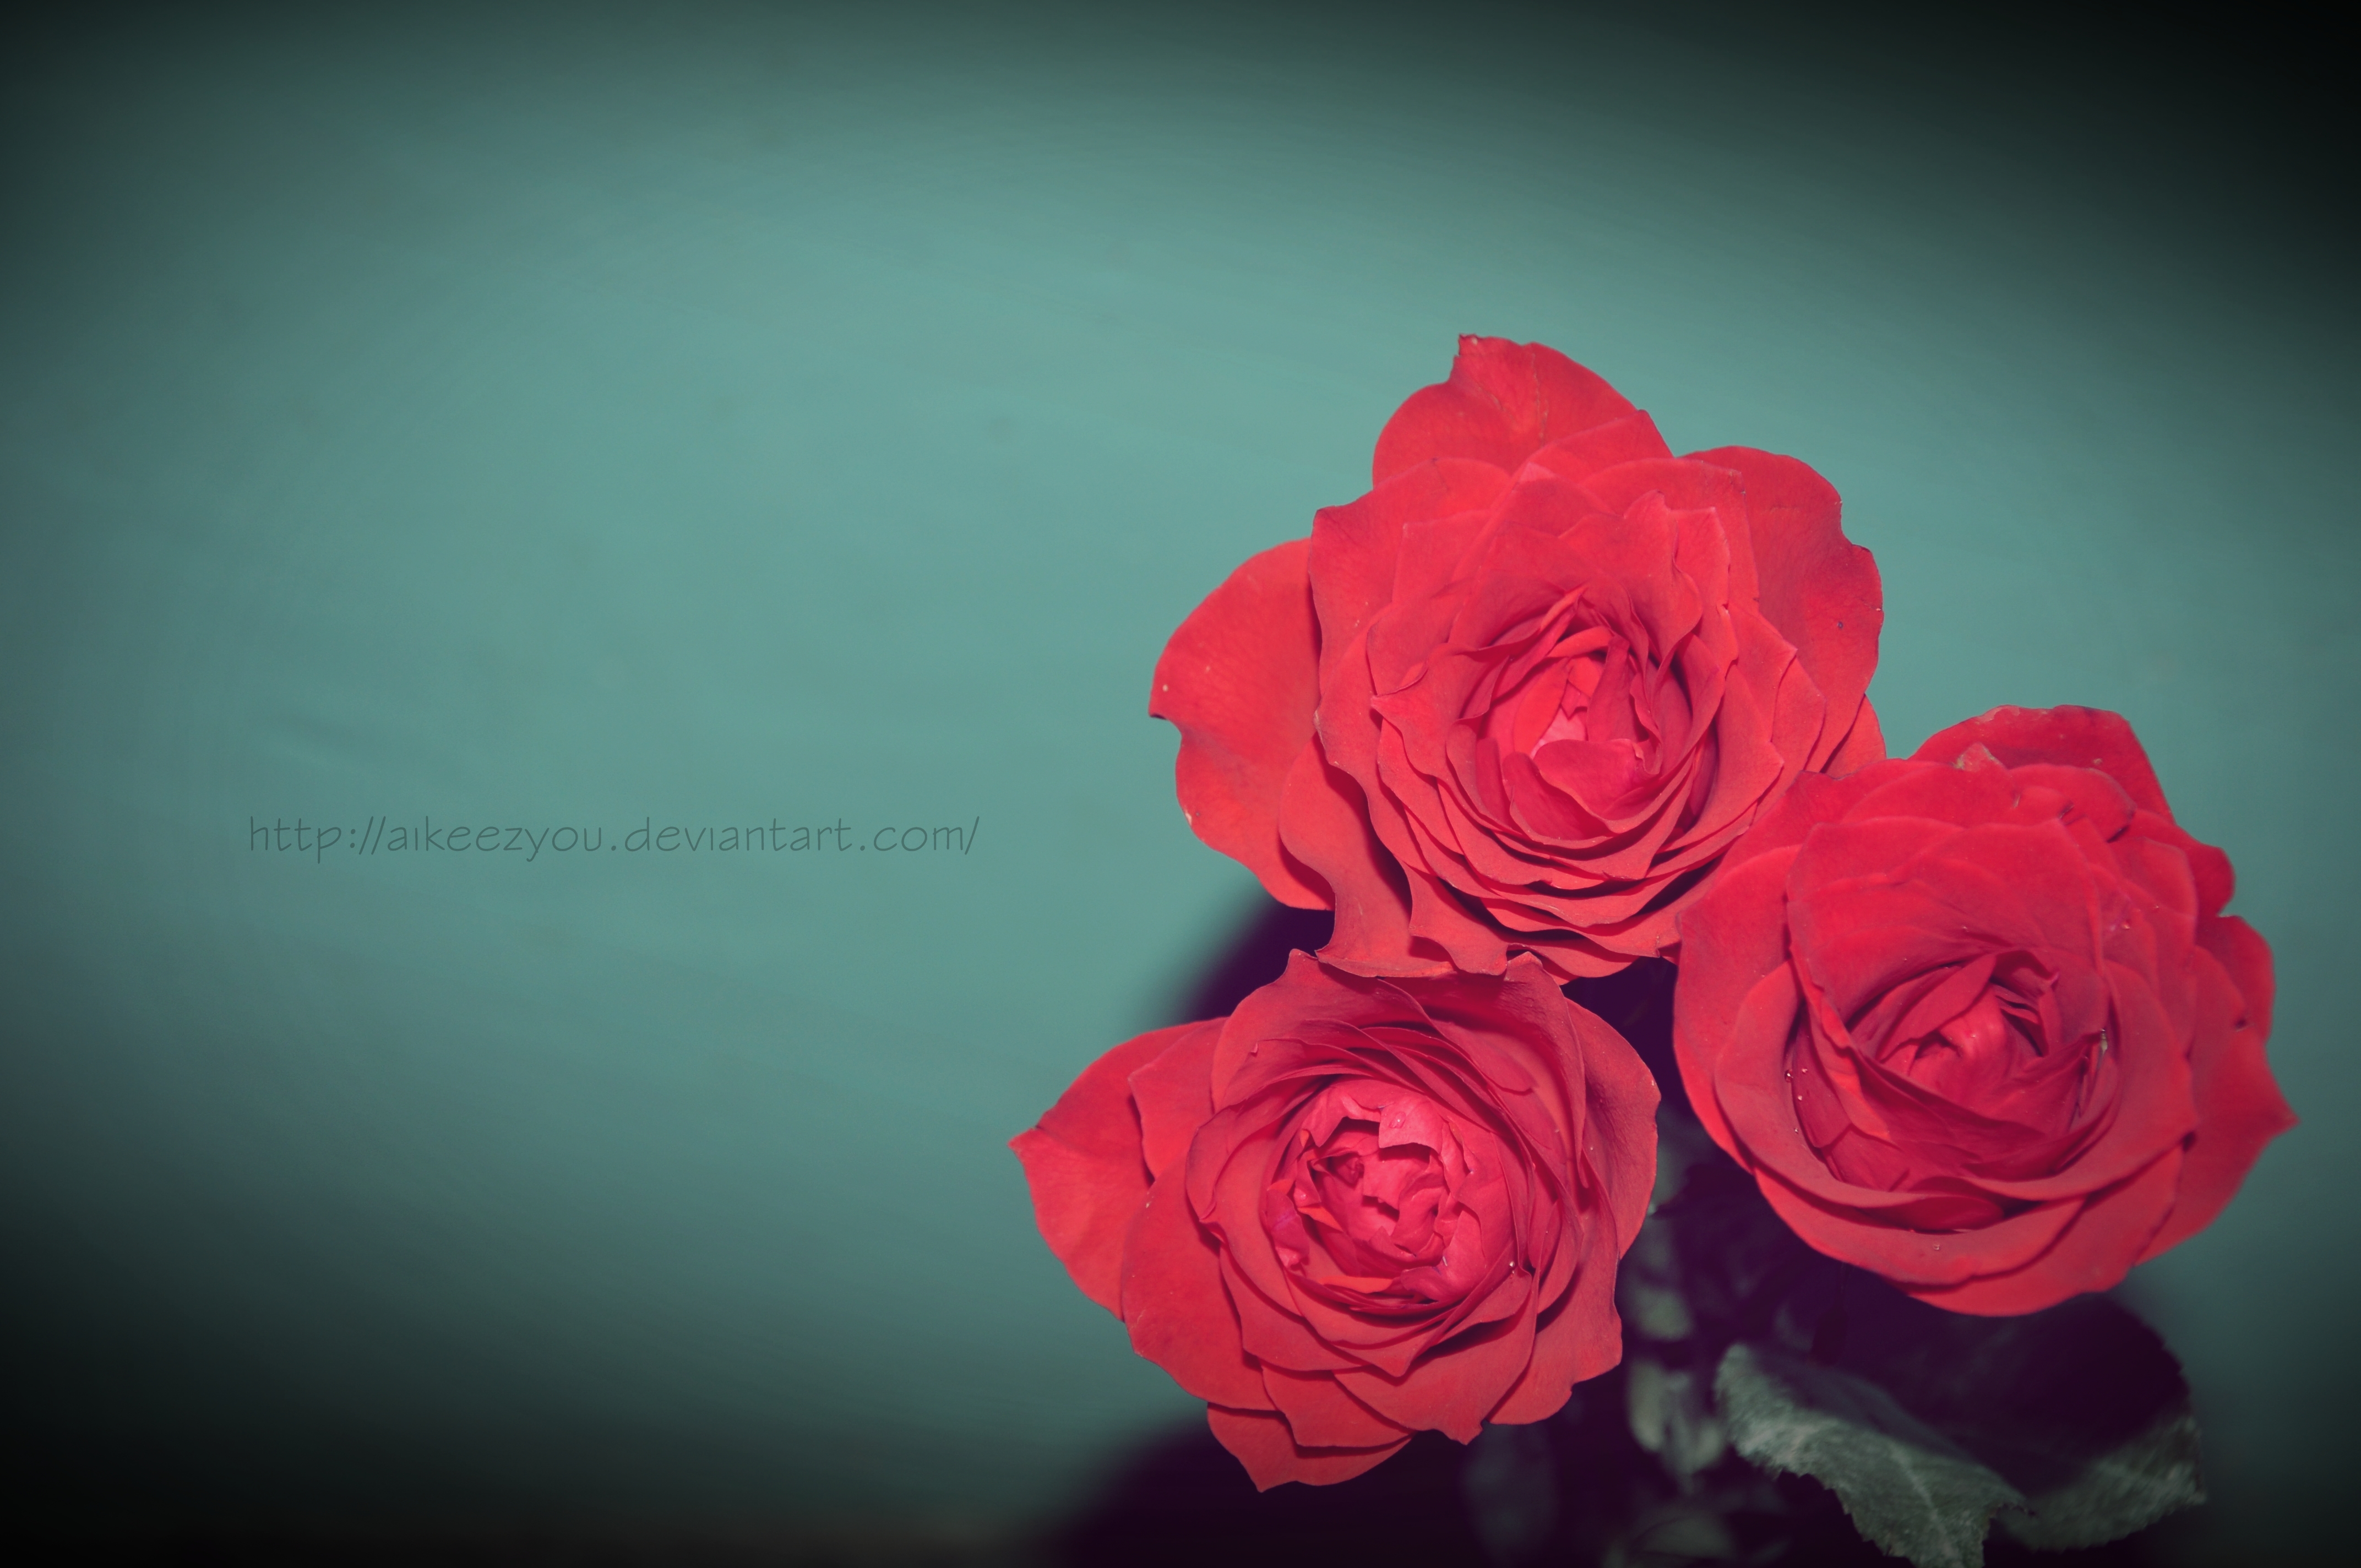 roses_are_red_by_aikeezyou-d5ejssl.jpg